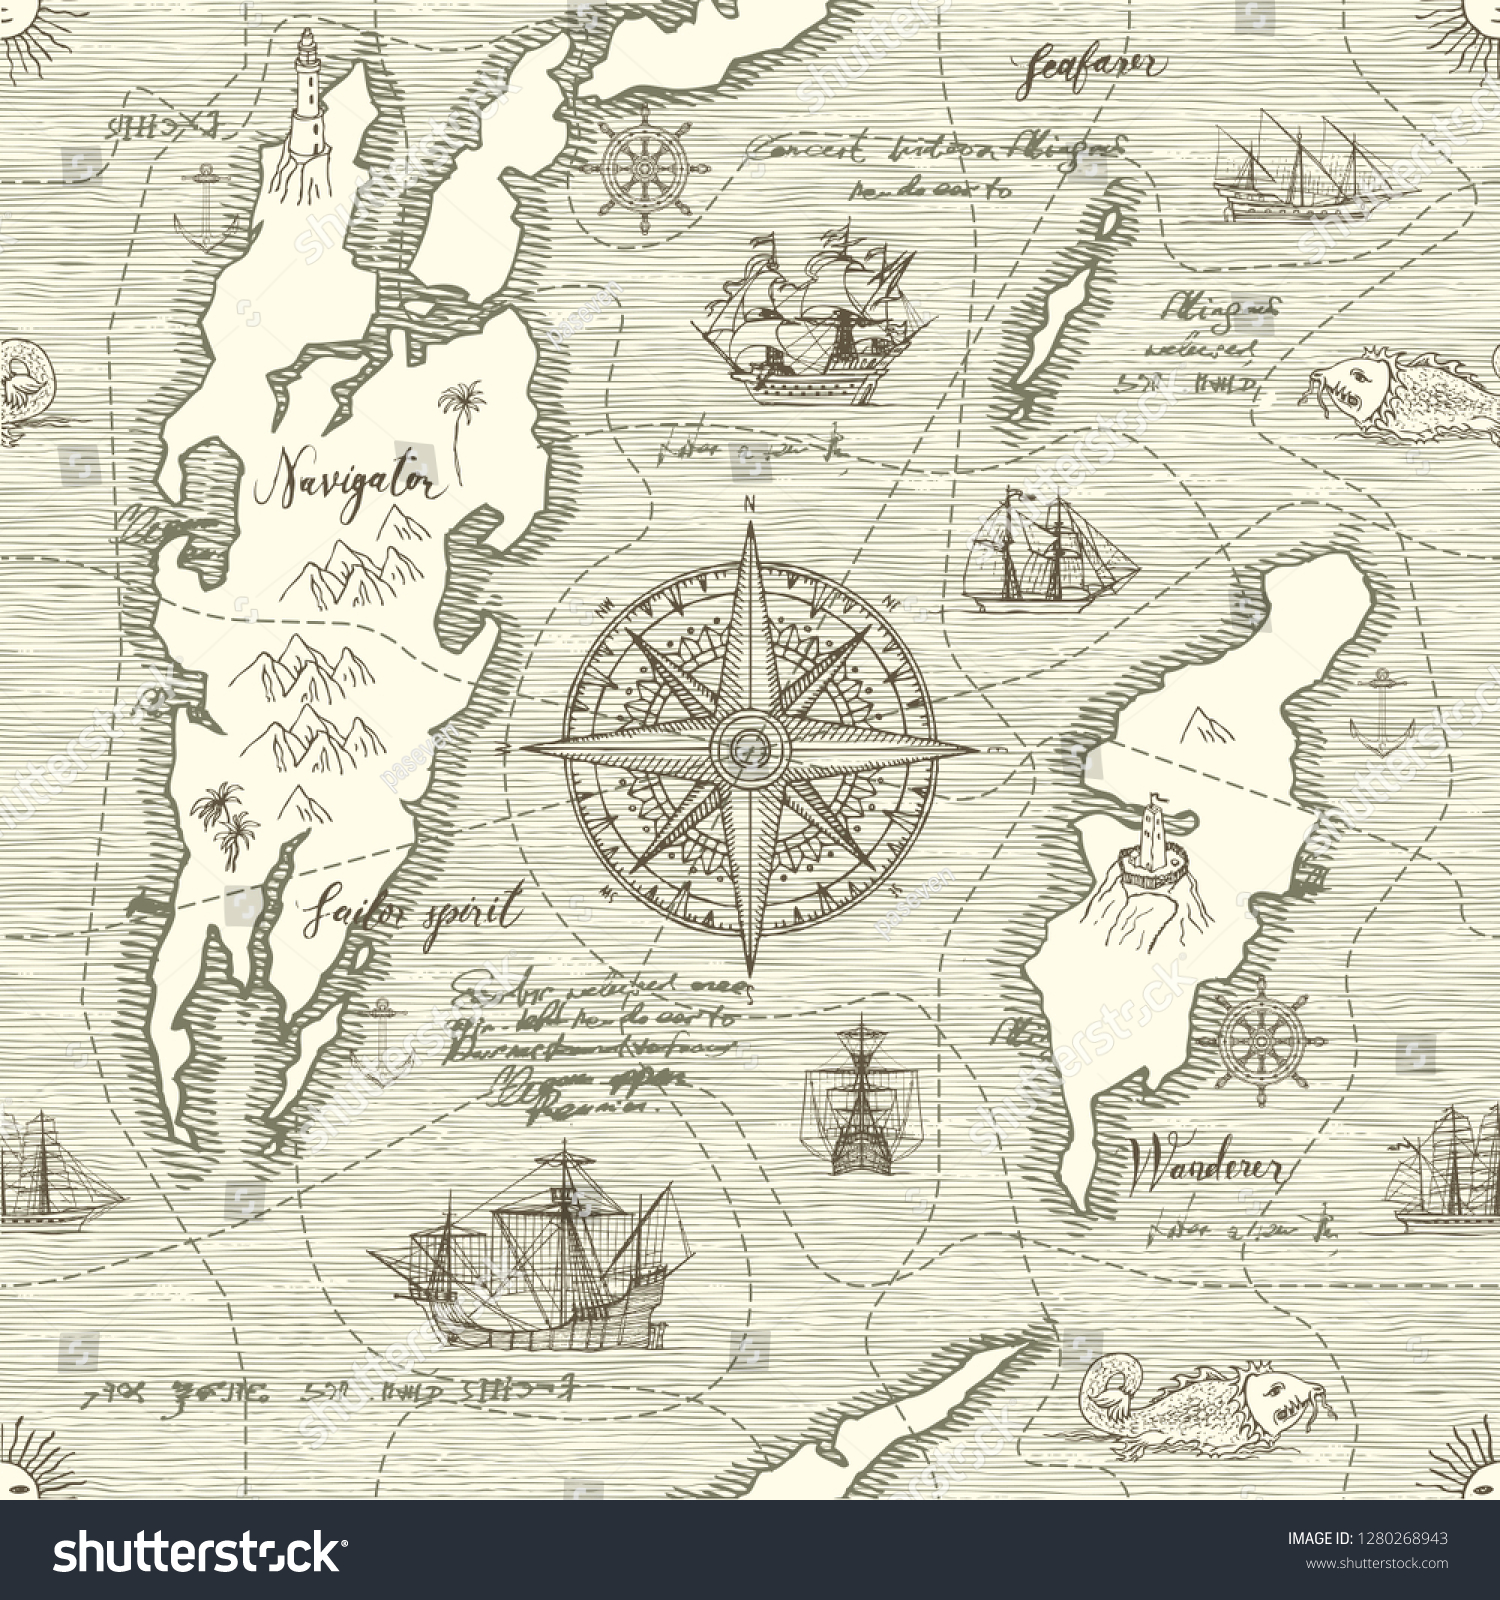 Vector abstract seamless background on the theme of travel, adventure and discovery. Old hand drawn map with vintage sailing yachts, wind rose, routs, nautical symbols and handwritten inscriptions #1280268943